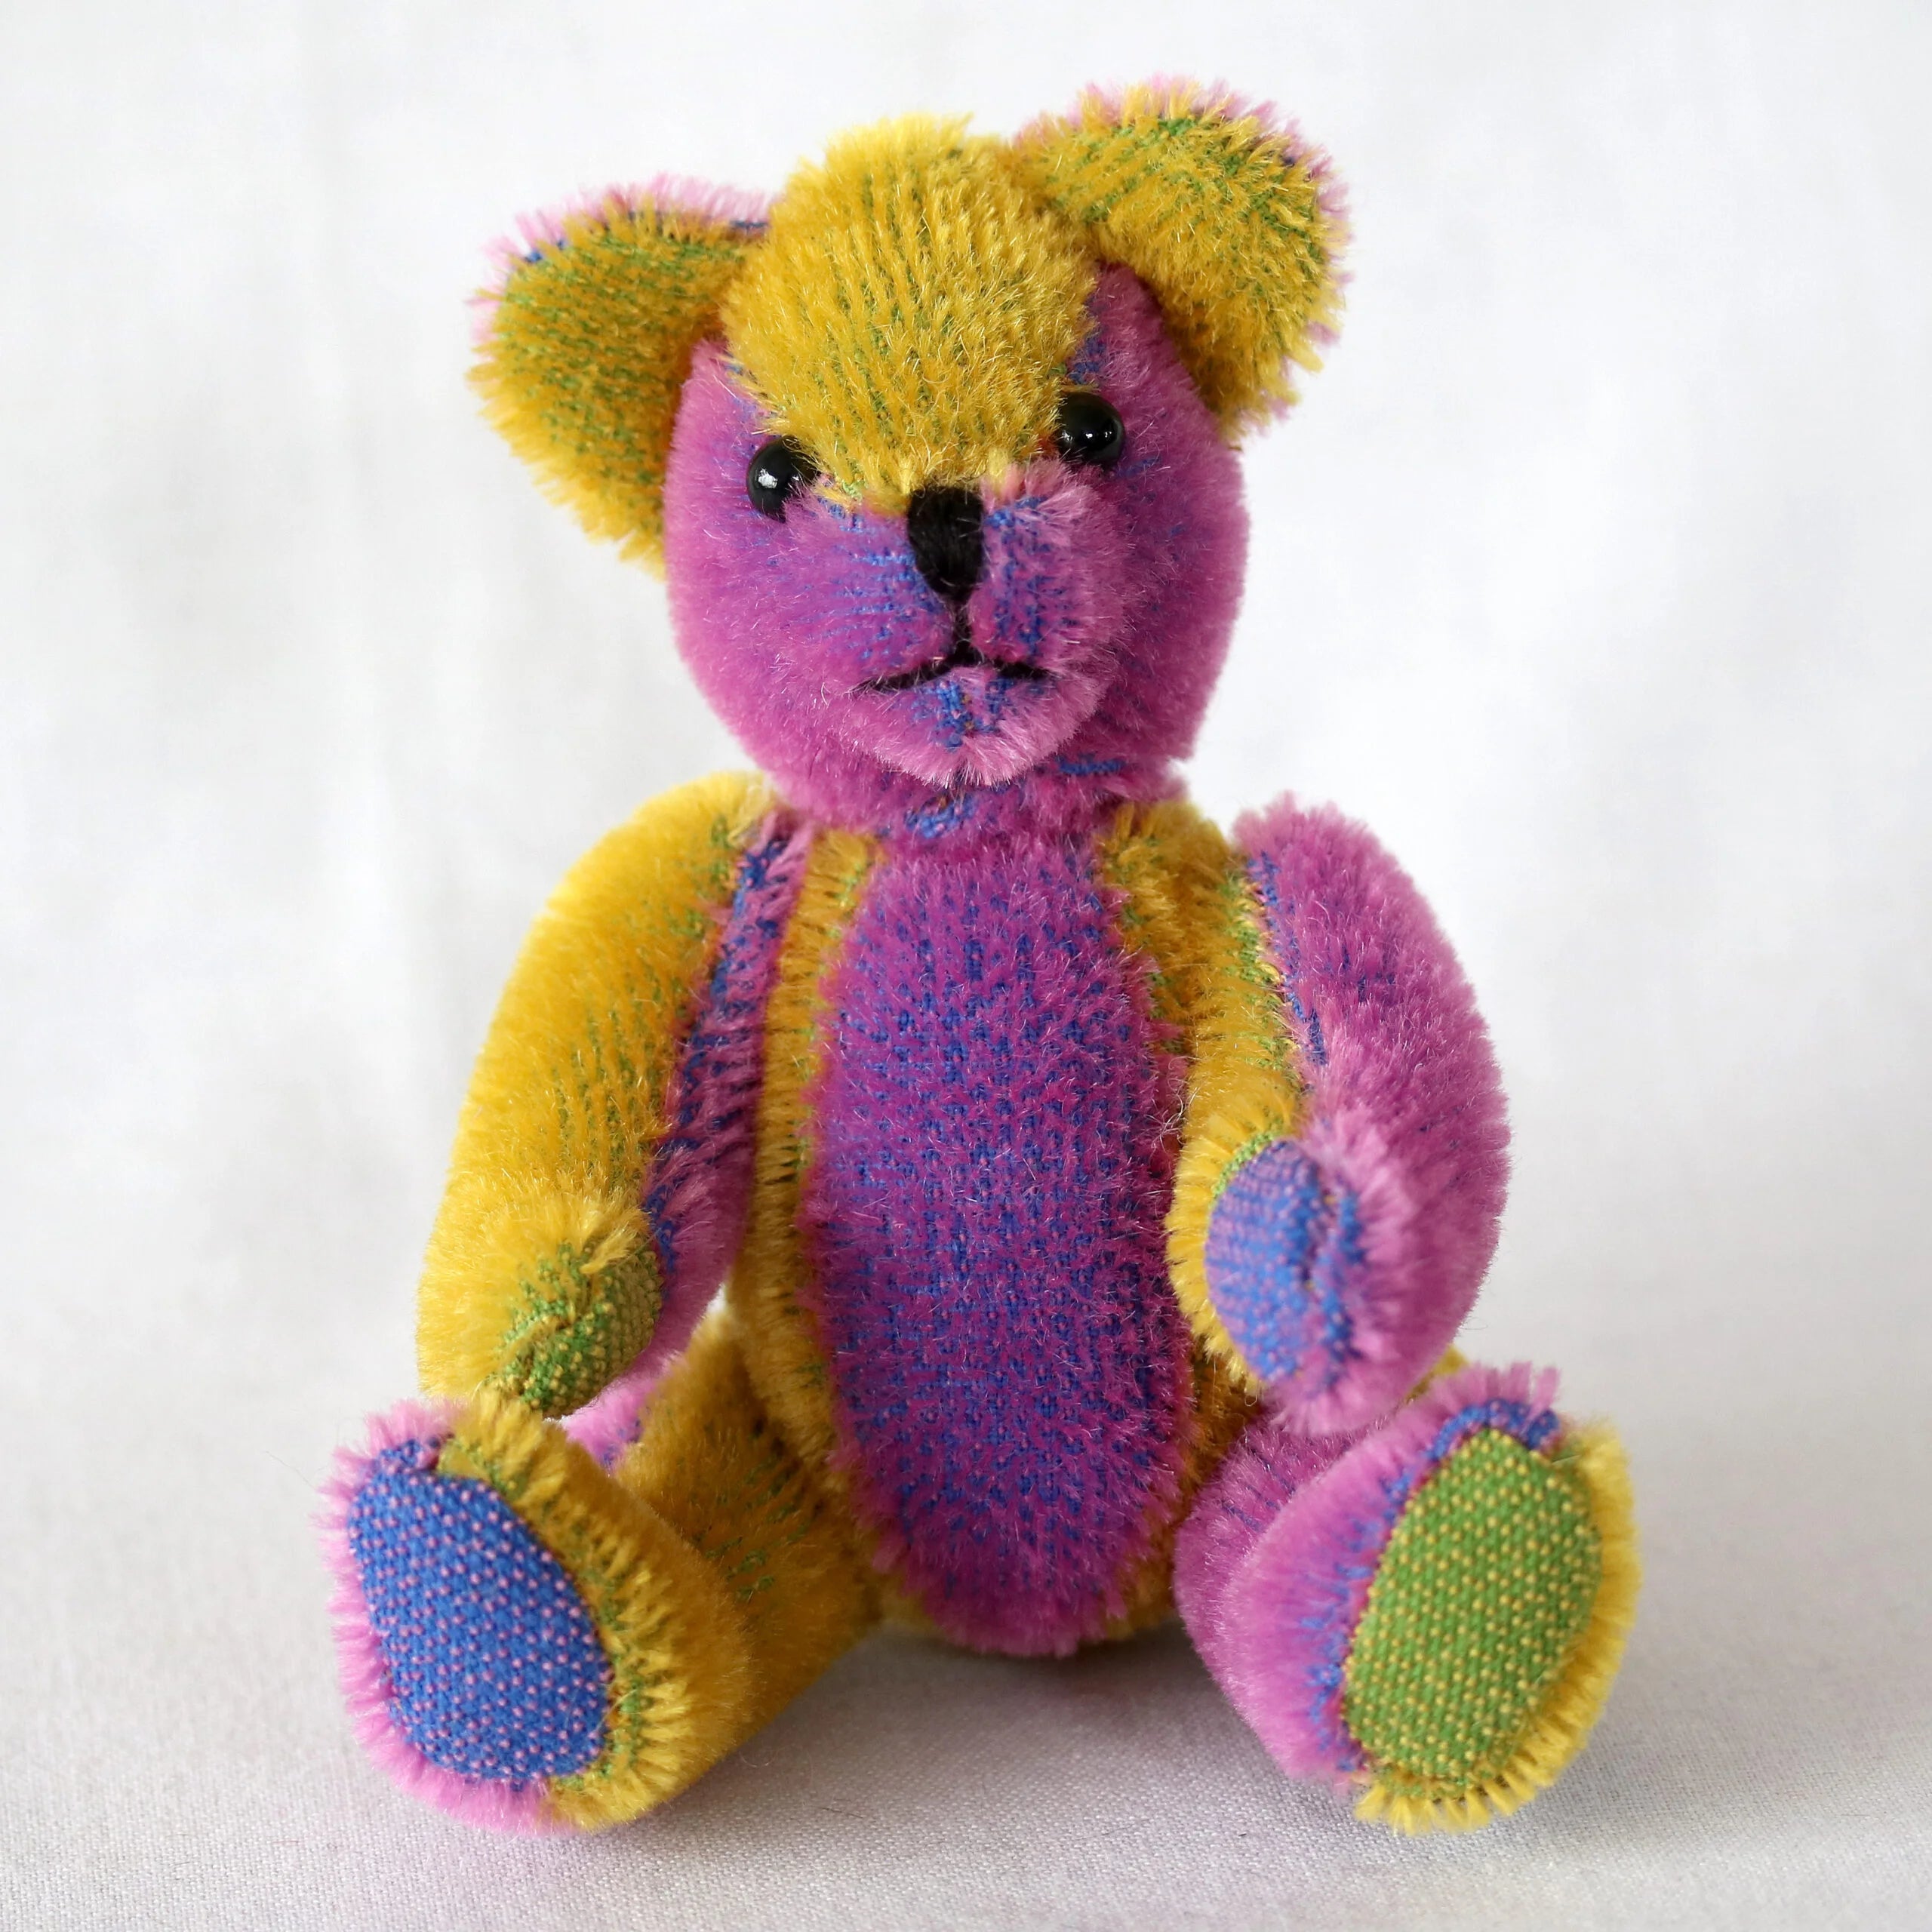 Harlequin Peter the Bear by Canterbury Bears